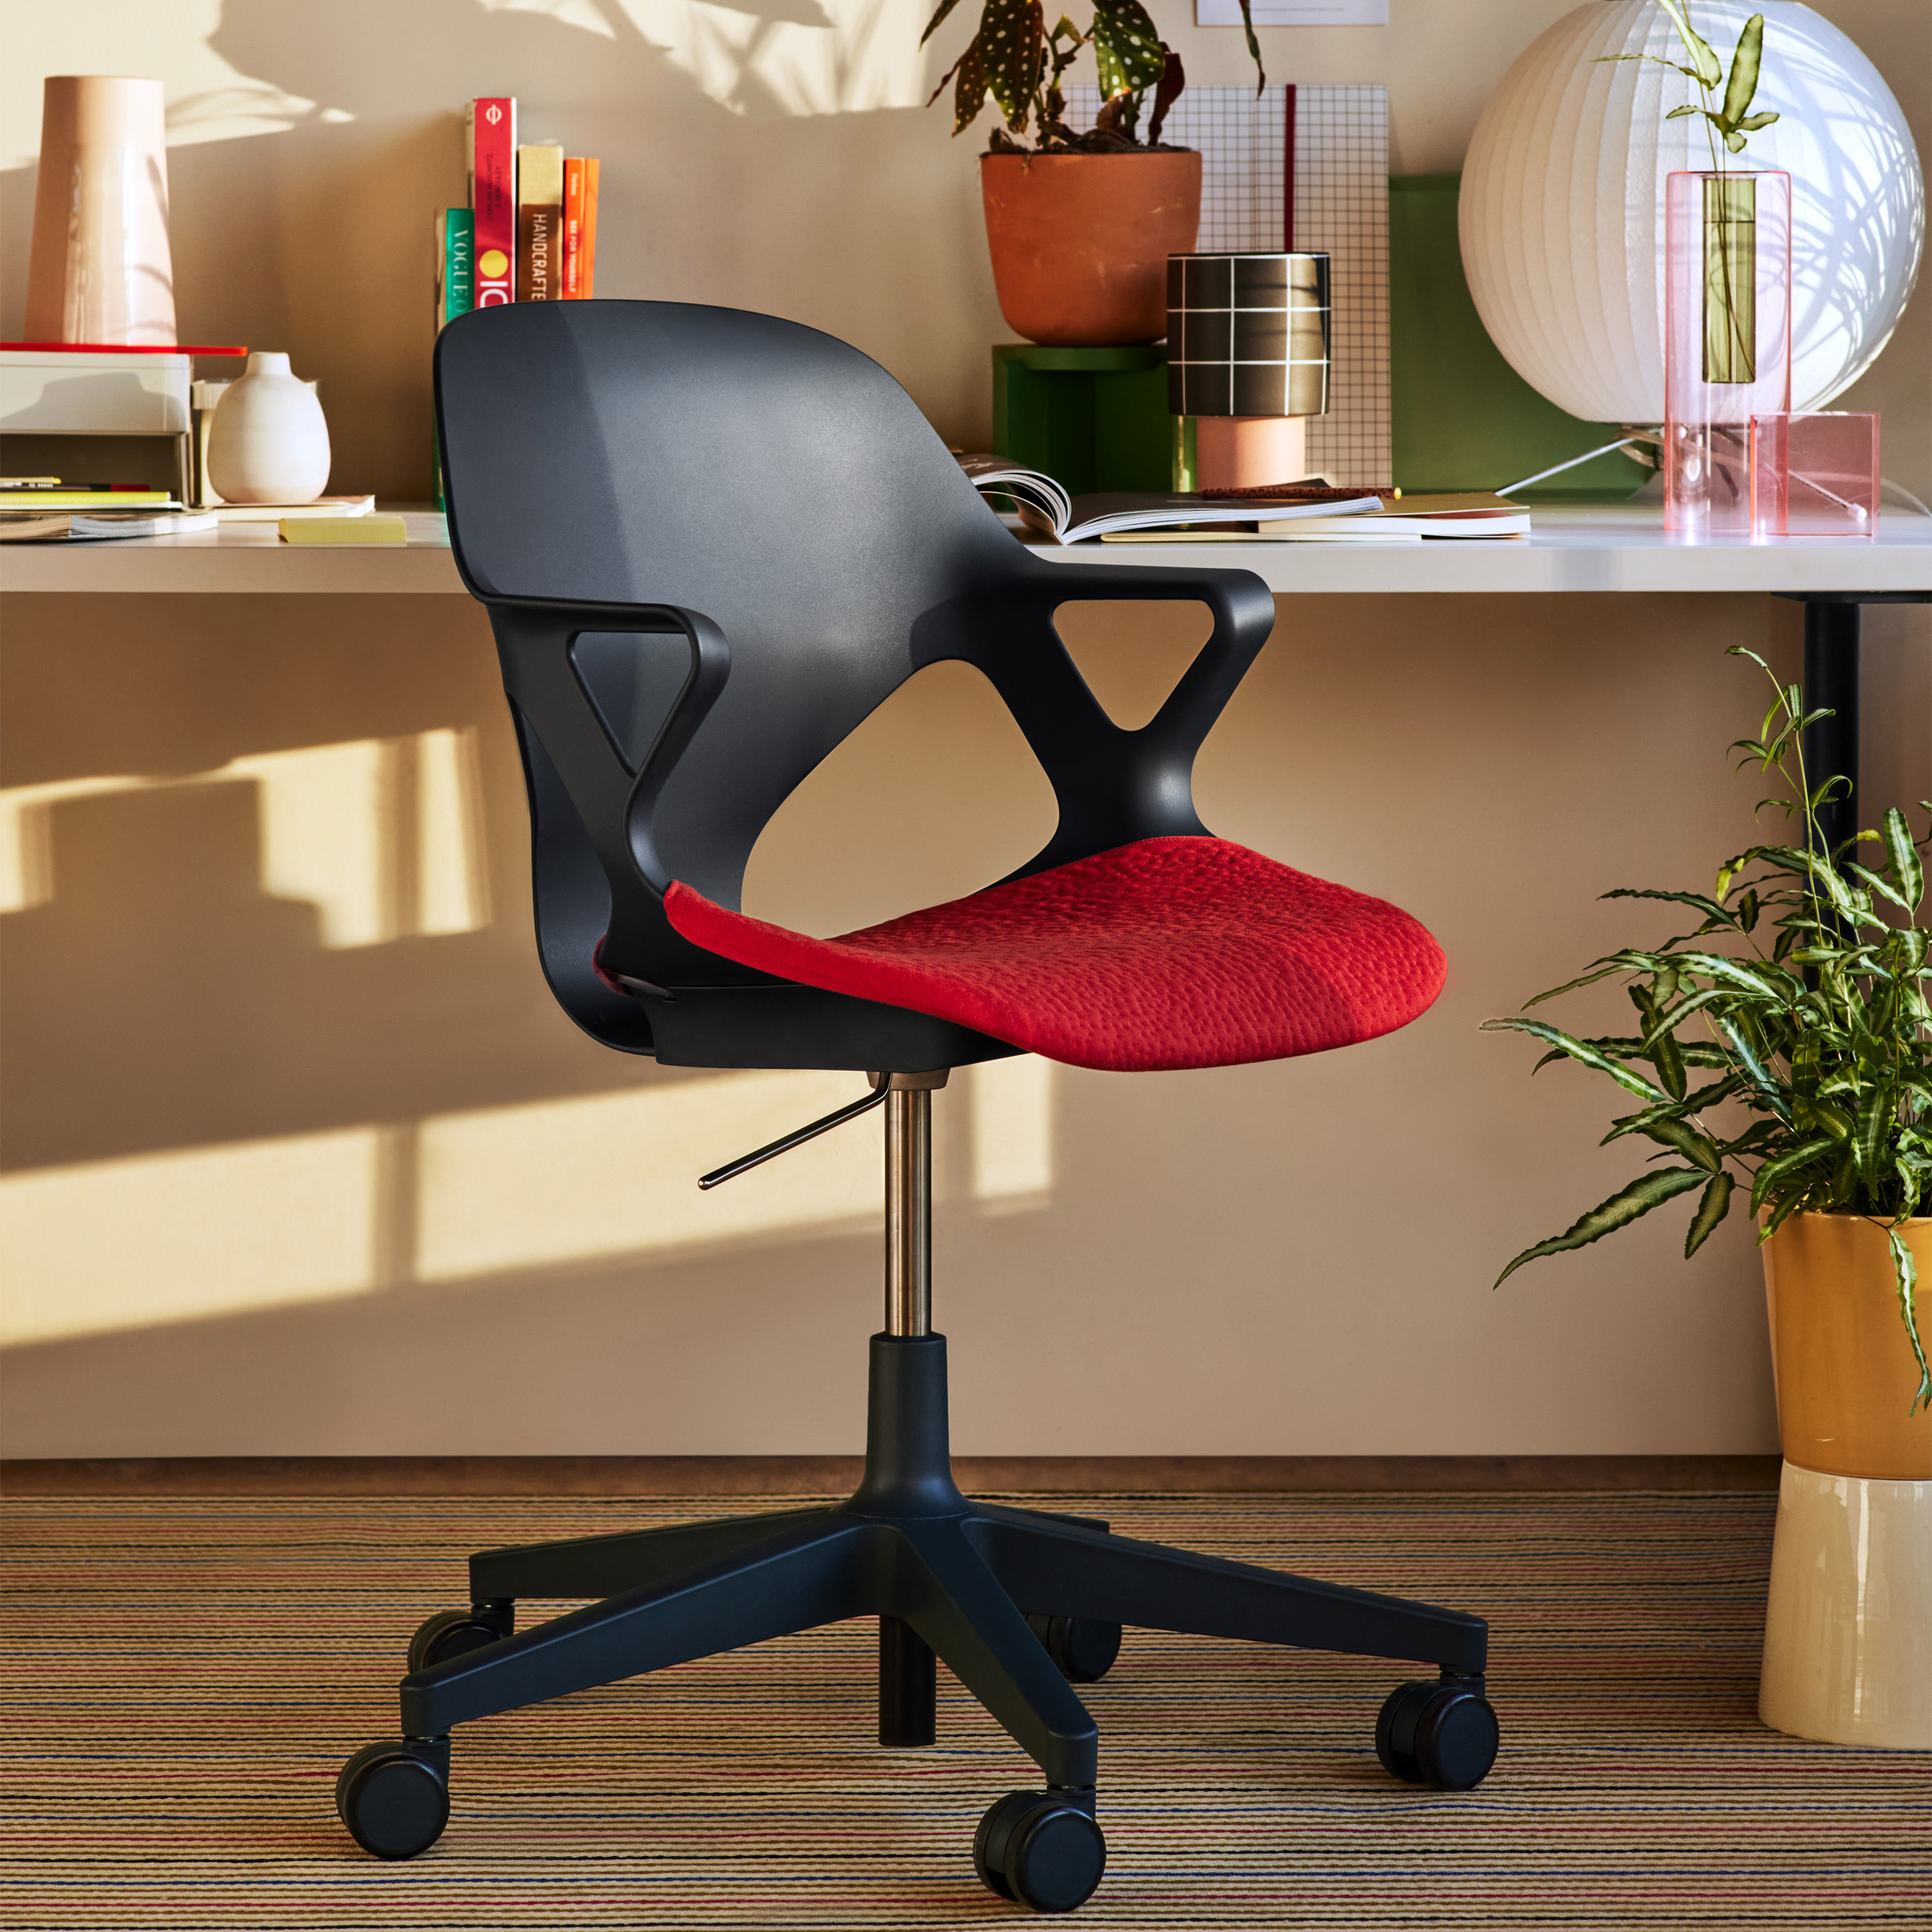 Black Zeph Chair with red upholstered seat at a home desk